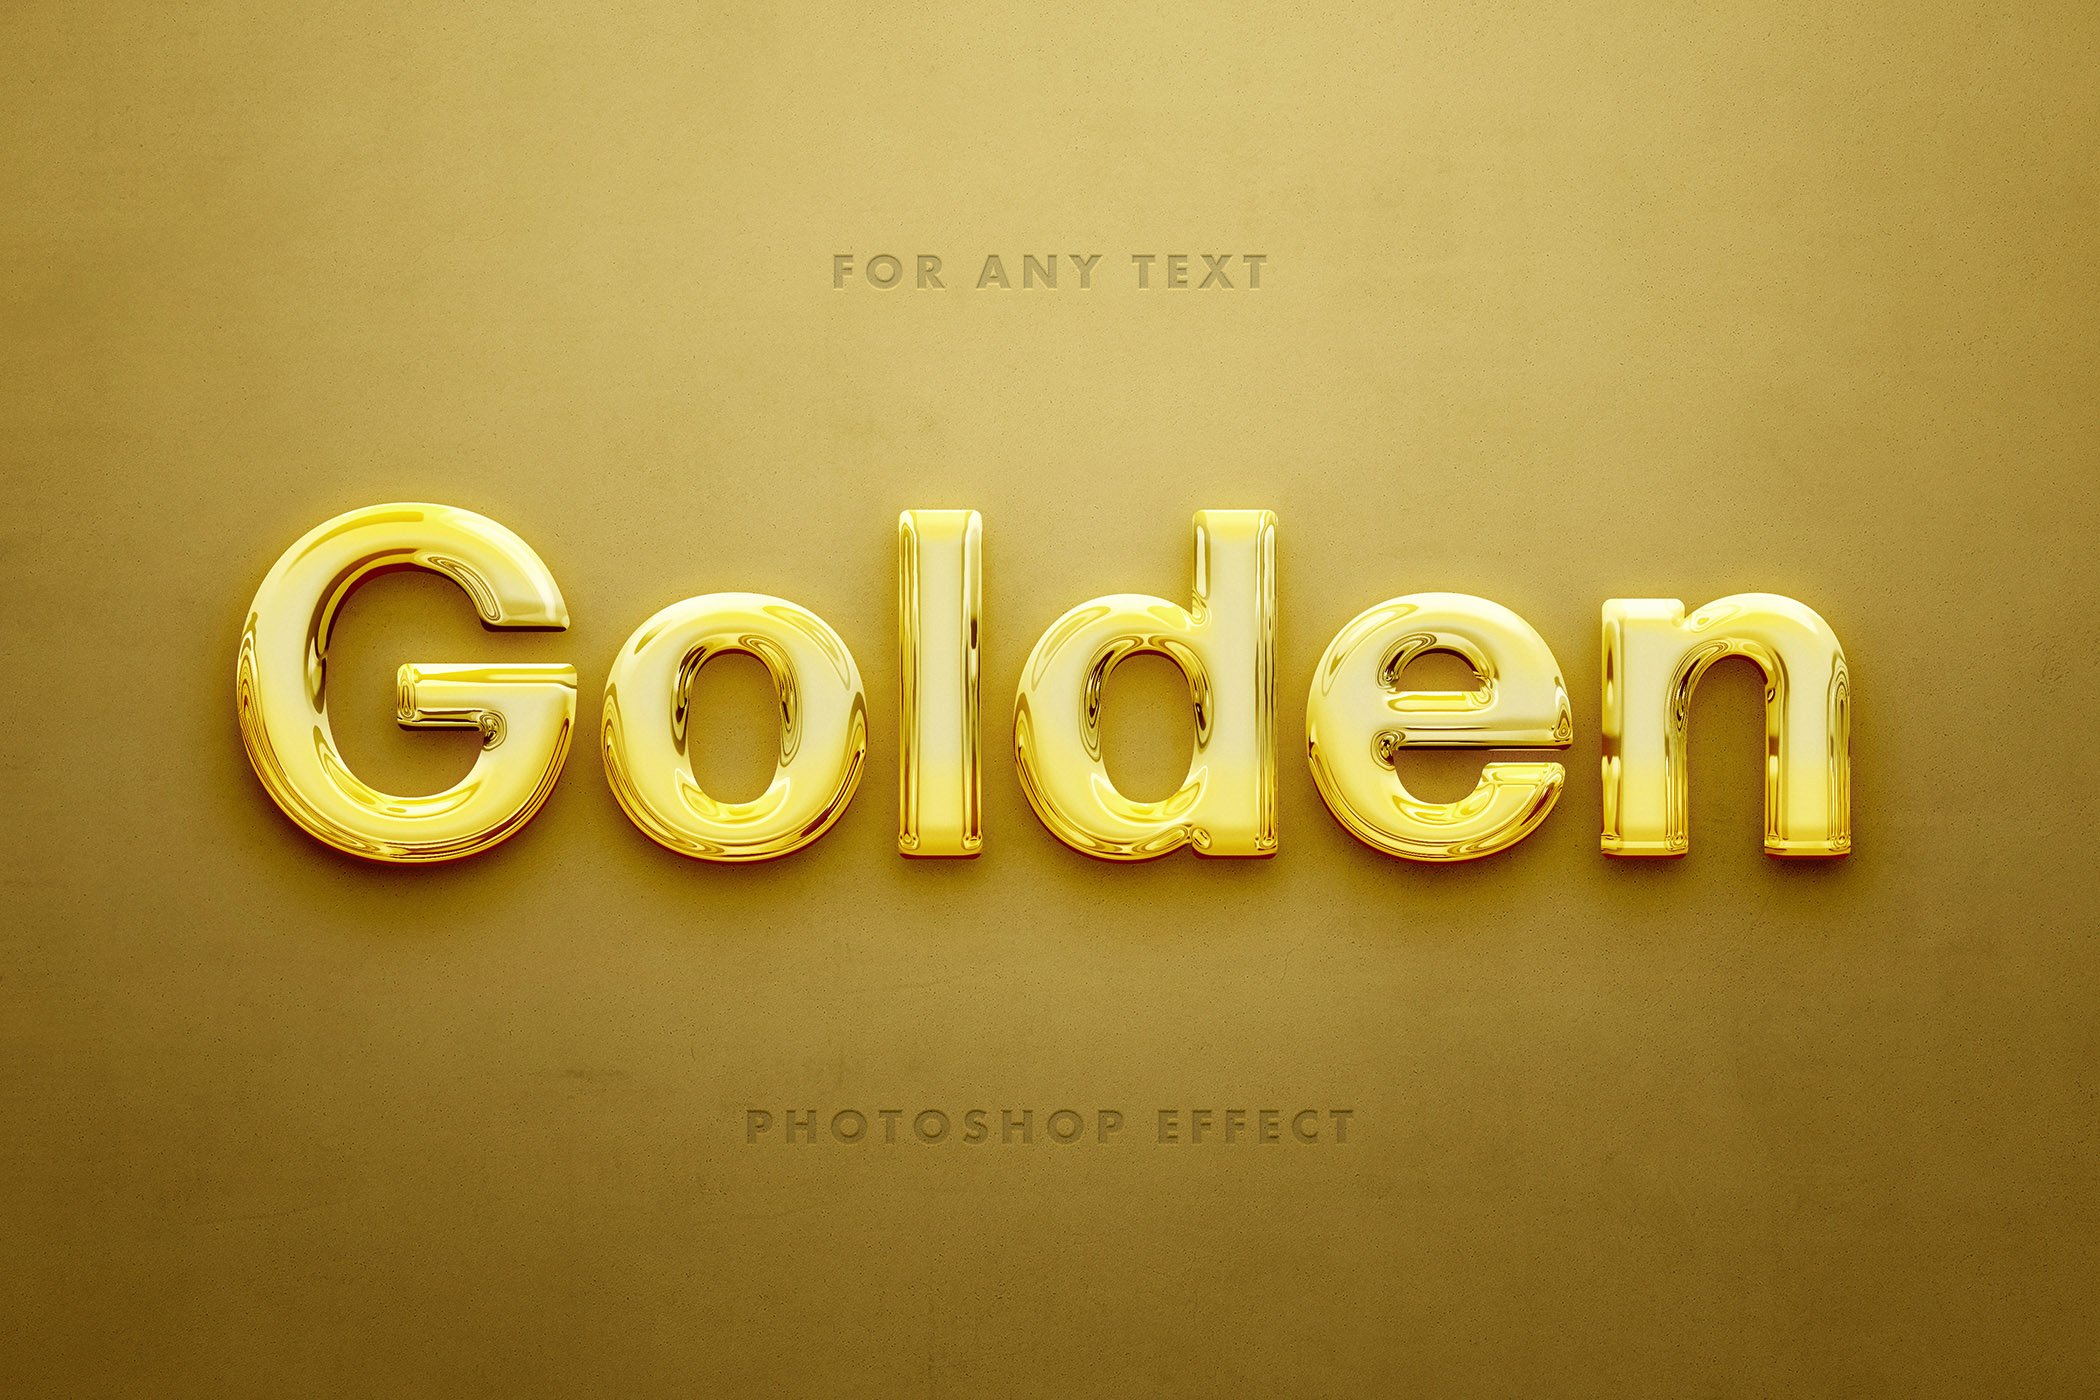 Glossy 3D Text Effectspreview image.